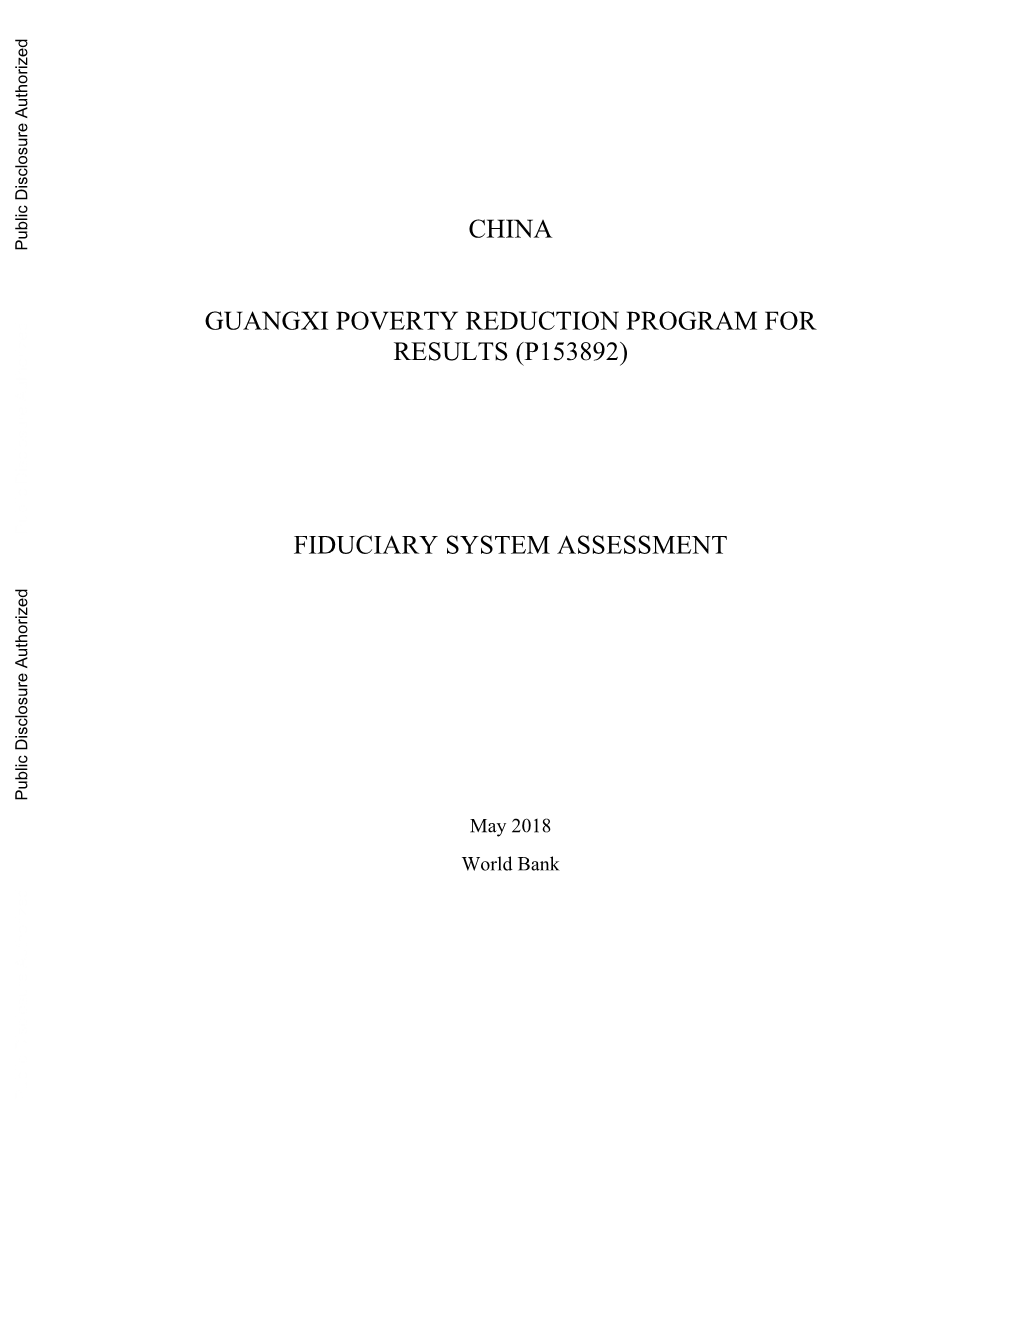 Guangxi Poverty Reduction Program for Results (P153892)